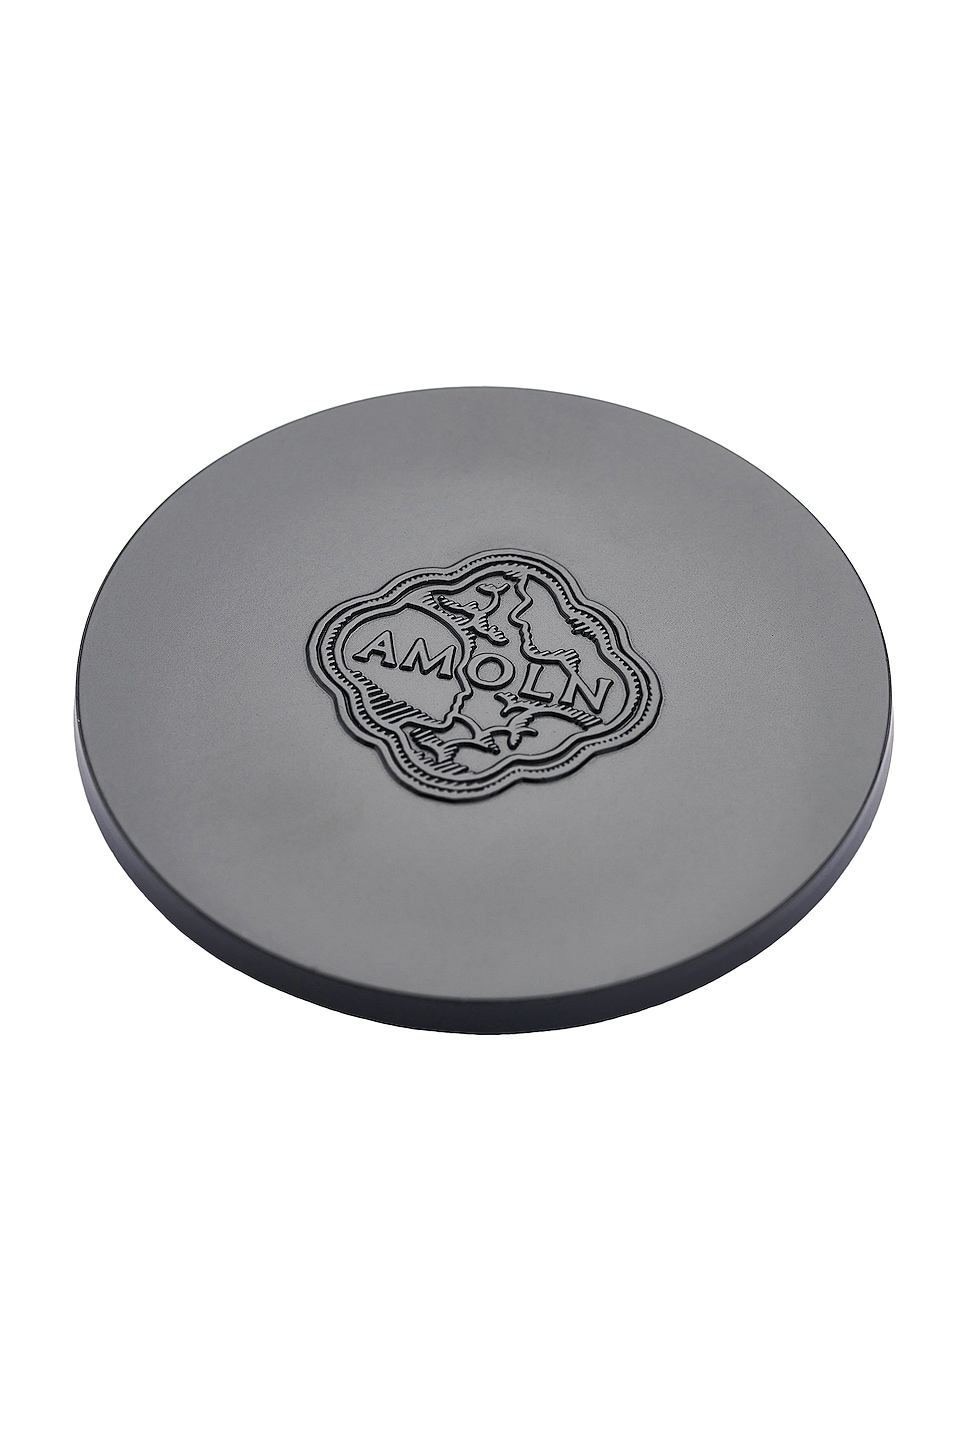 Image 1 of Amoln Black Candle Lid in Black